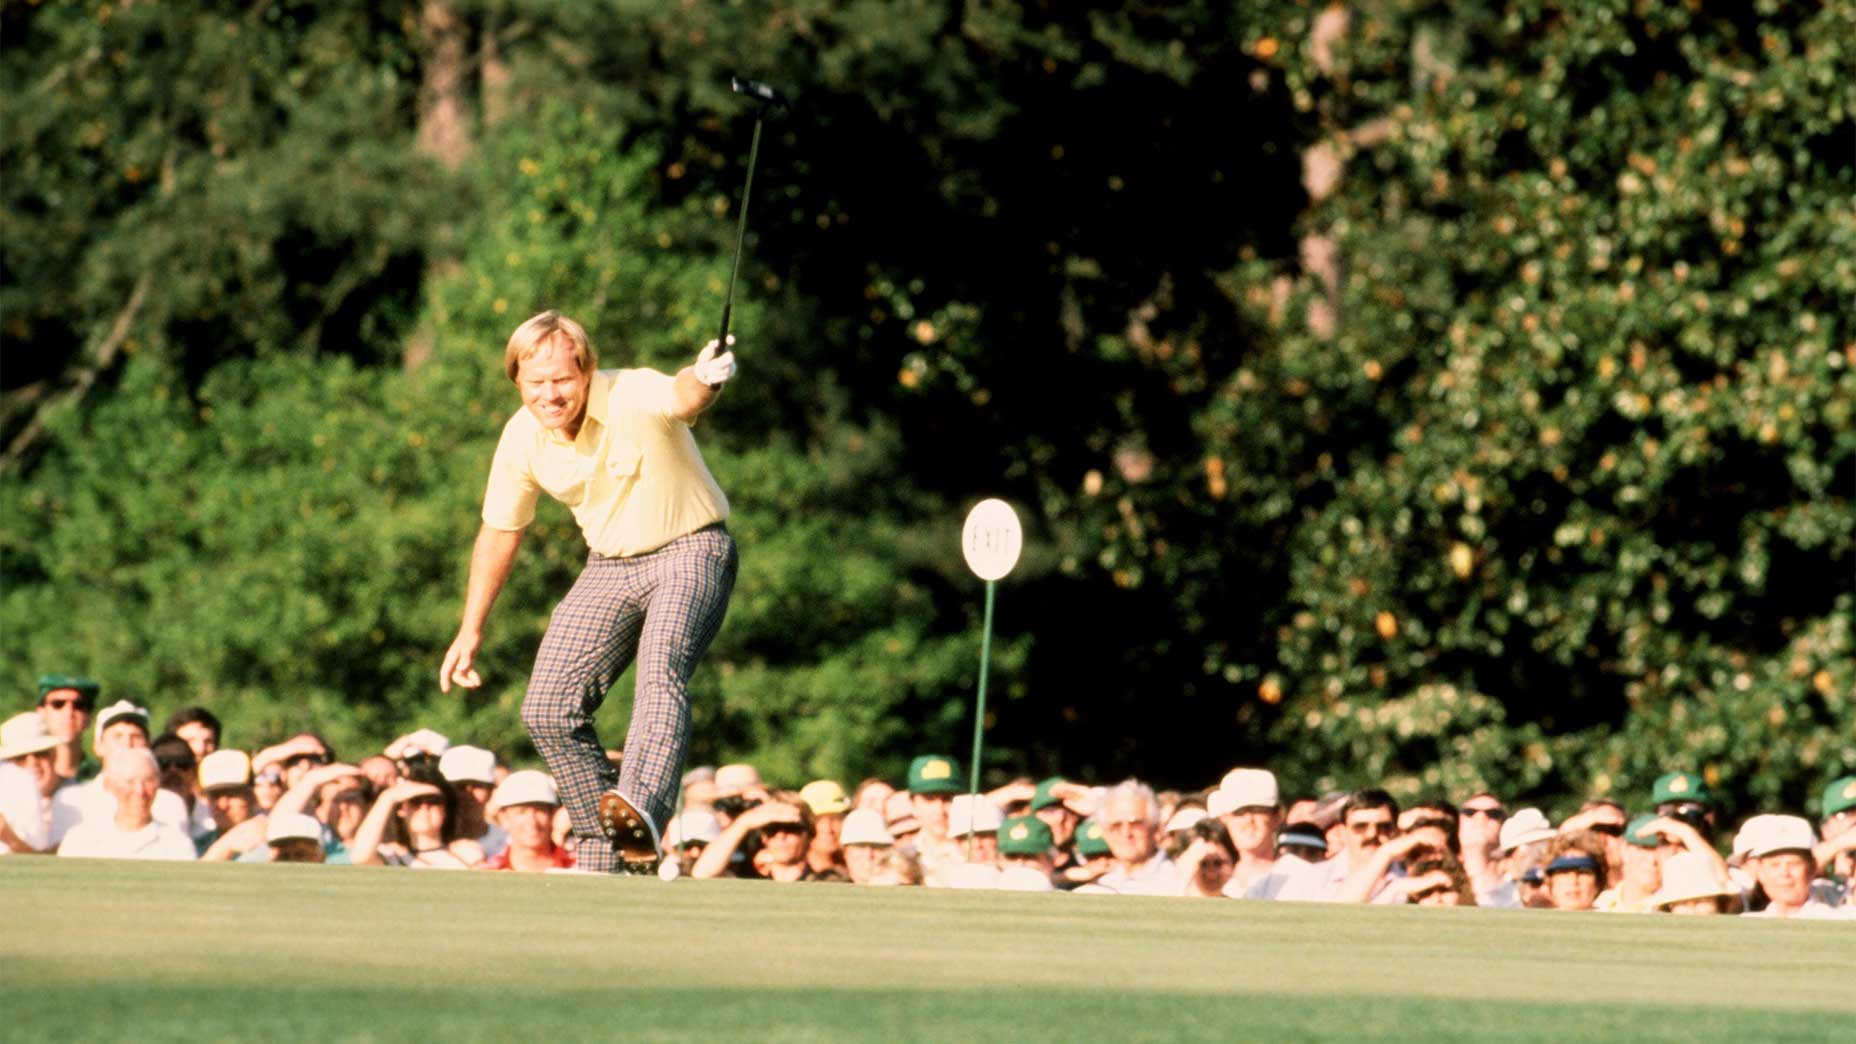 Jack Nicklaus' famous 1986 Masters putt.